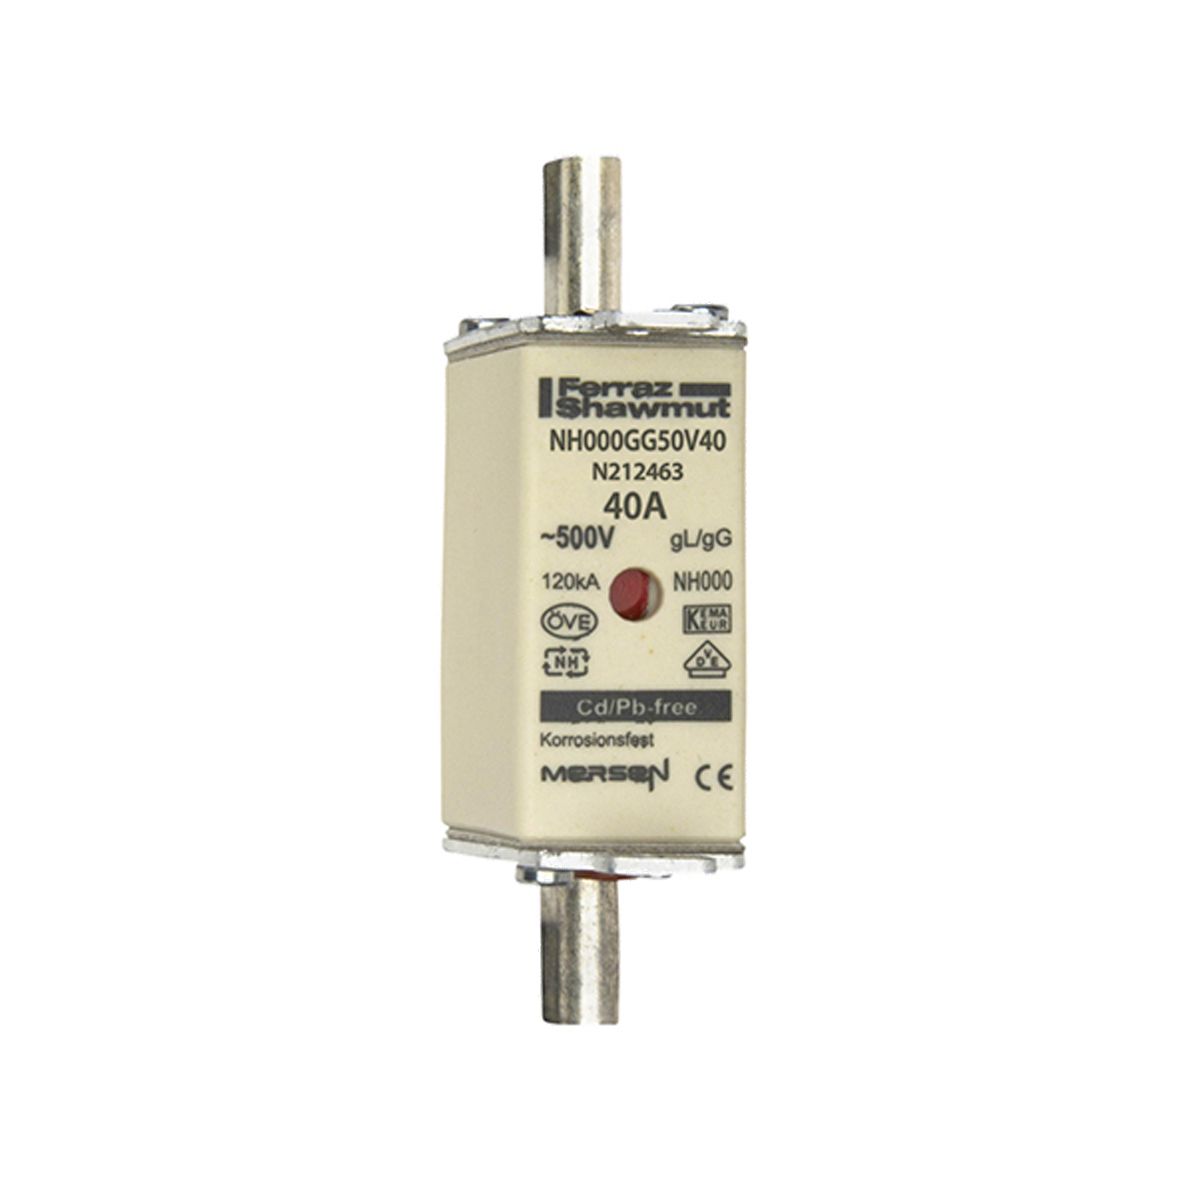 N212463 - NH fuse-link gG, 500VAC, size 000, 40A double indicator/live tags